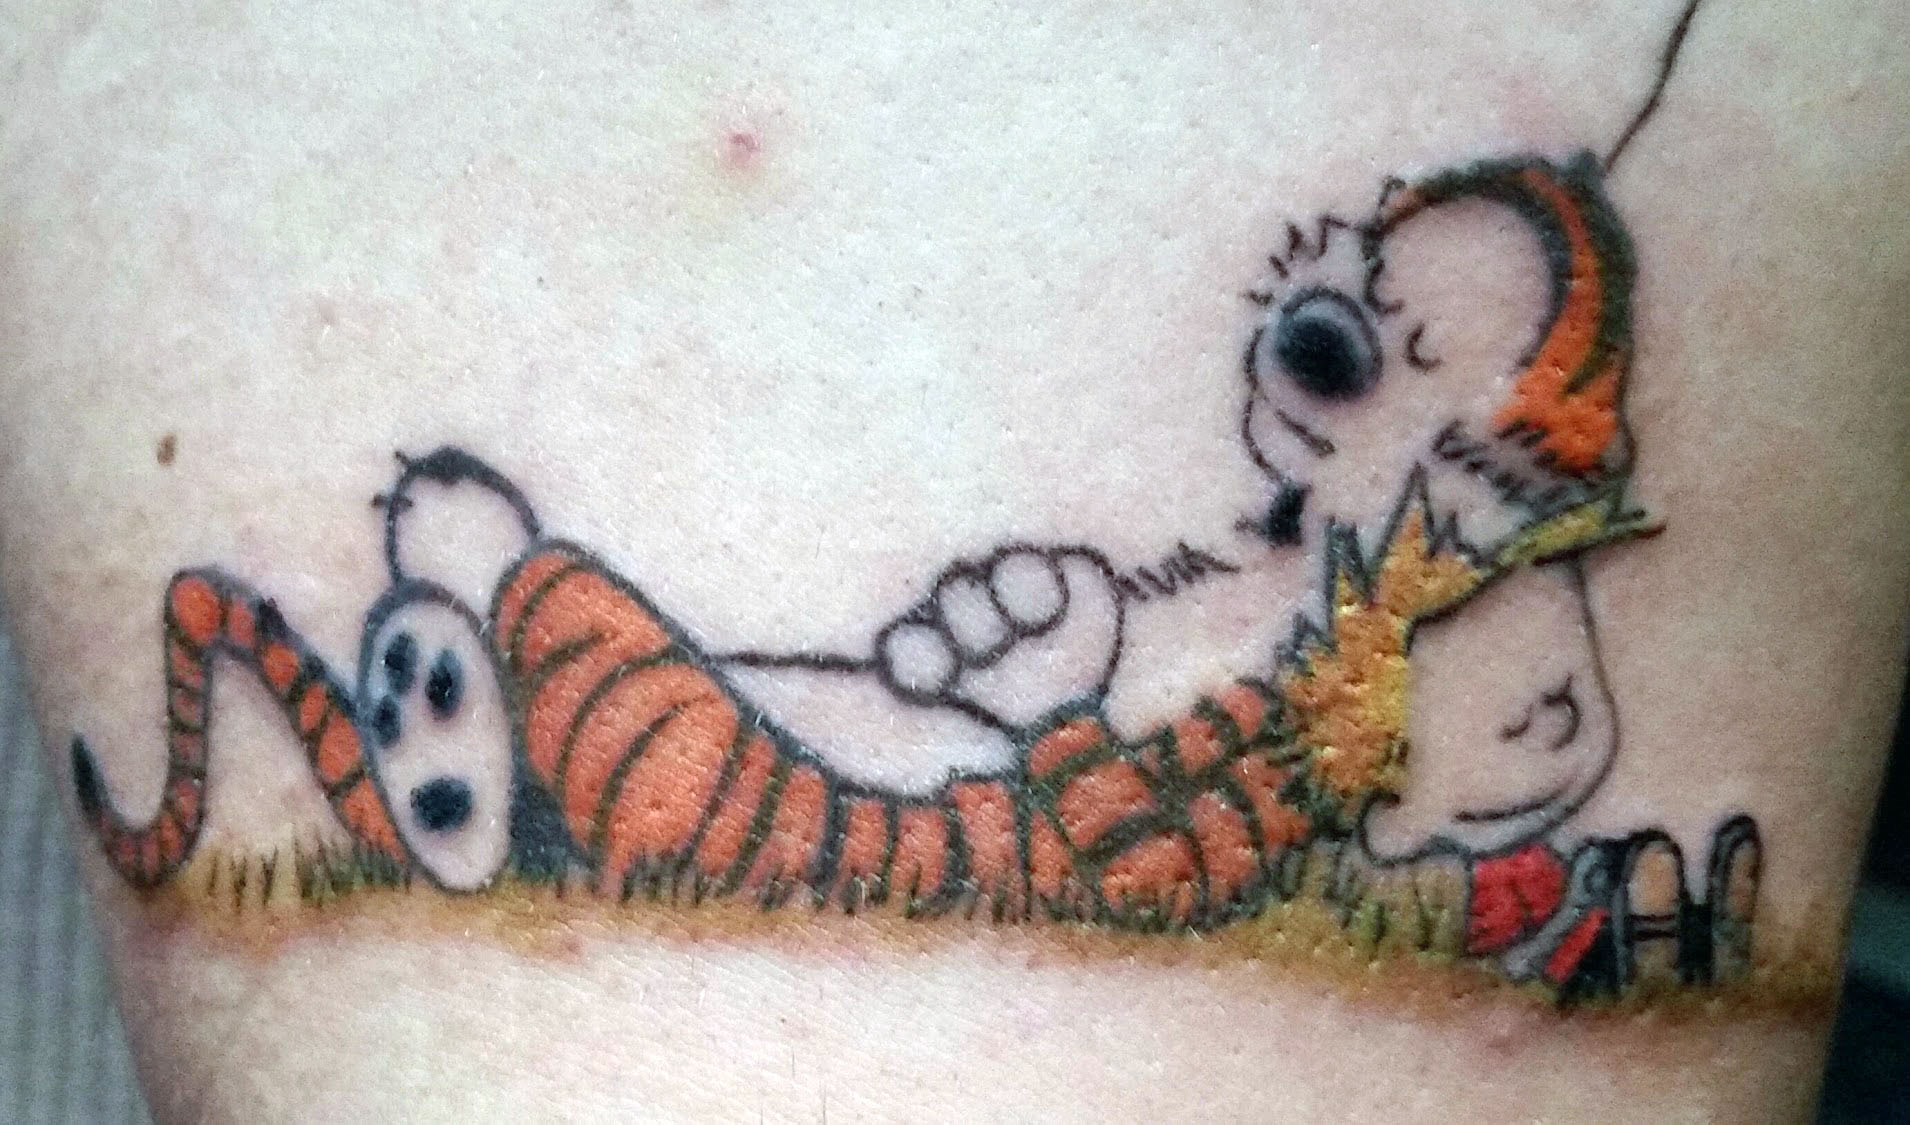 101 Amazing Calvin and Hobbes Tattoo Designs You Need To See  Outsons